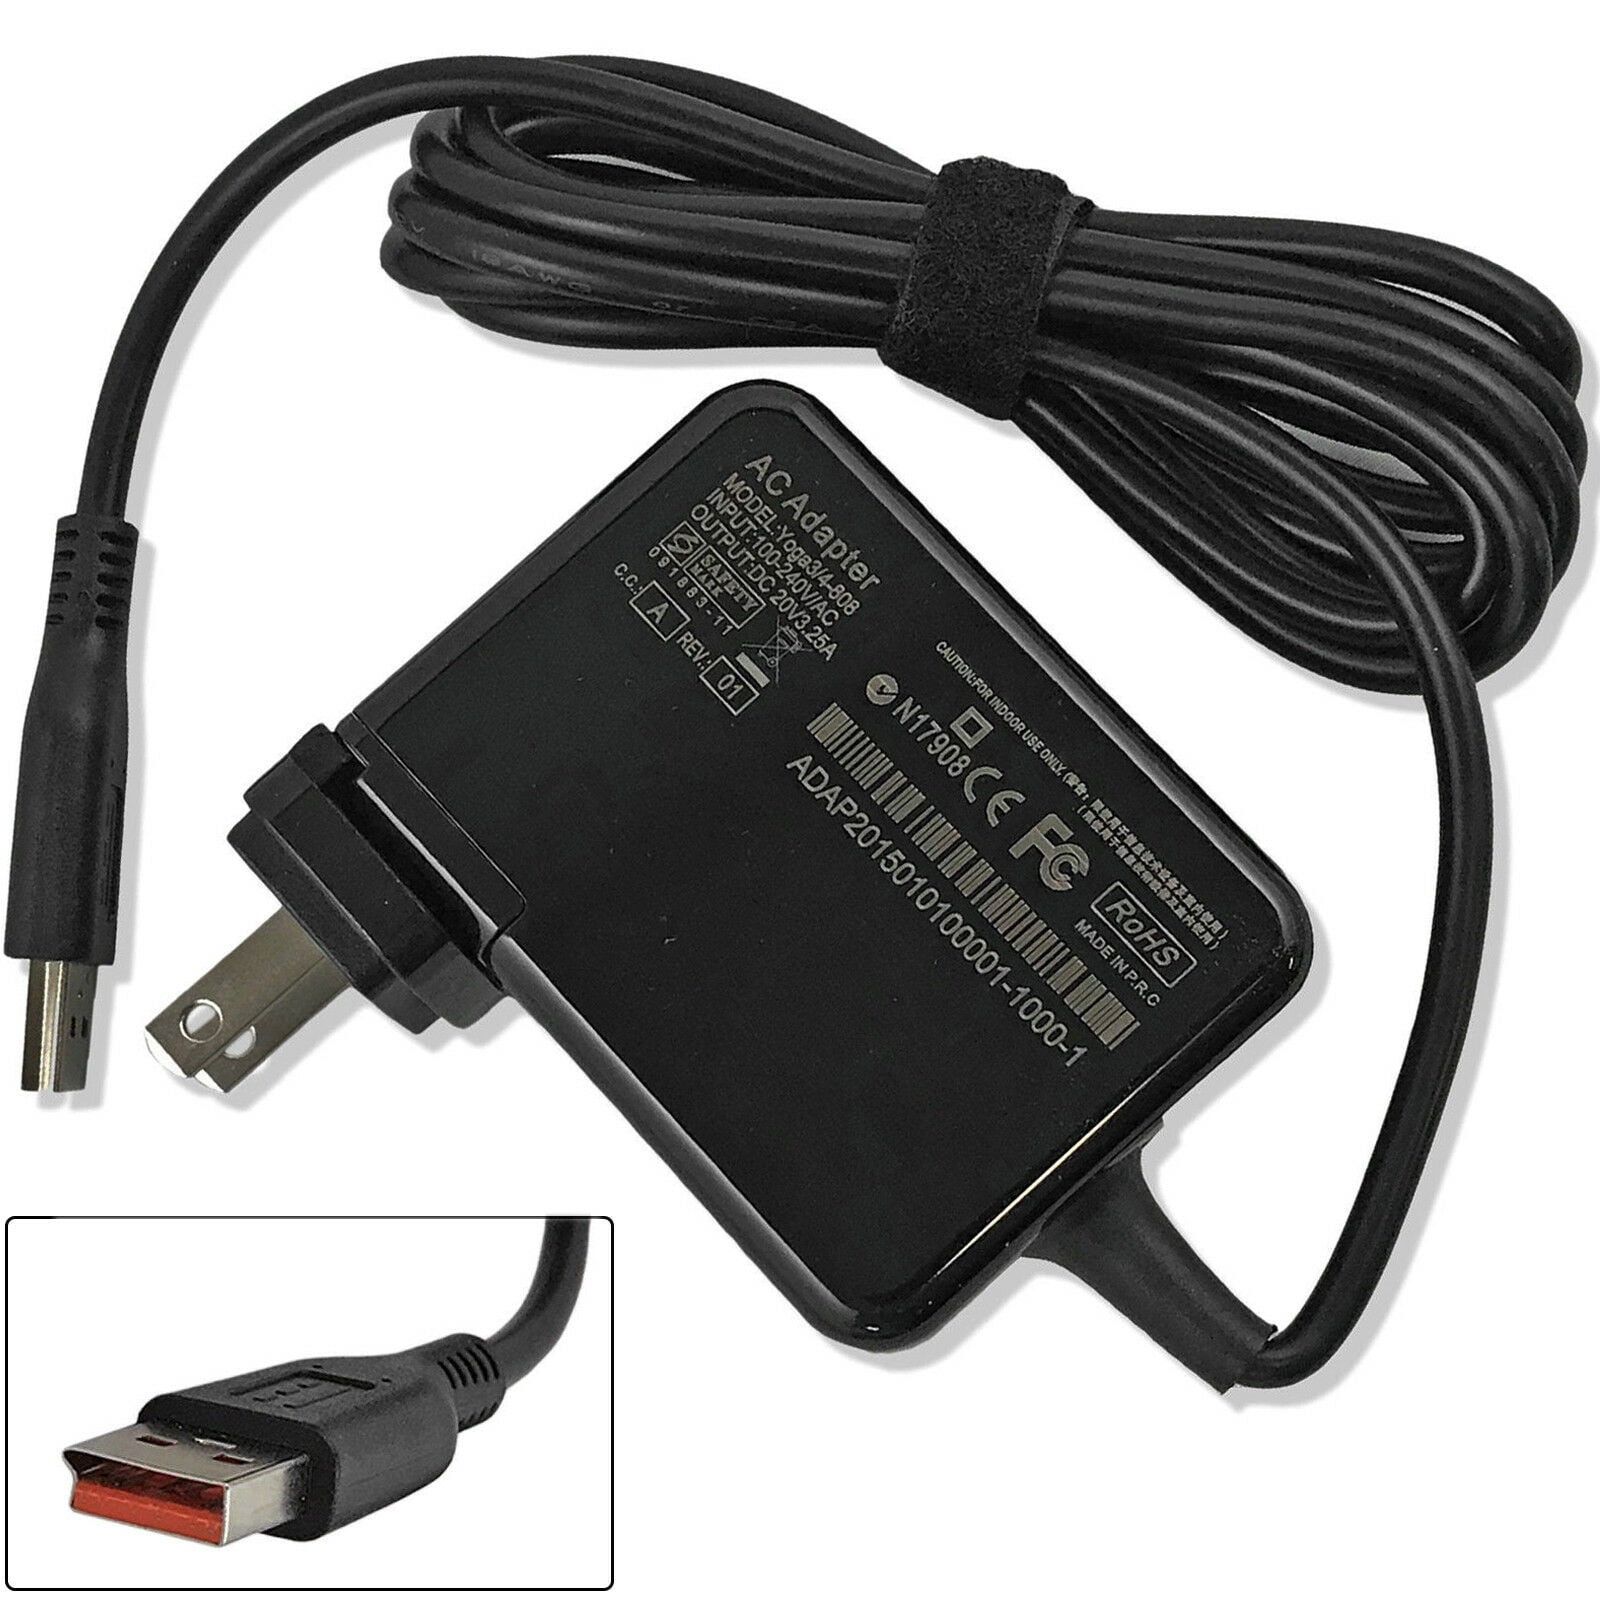 SLLEA USB Power Charger Charging Cable Cord for Lenovo Pro Yoga 700 900 